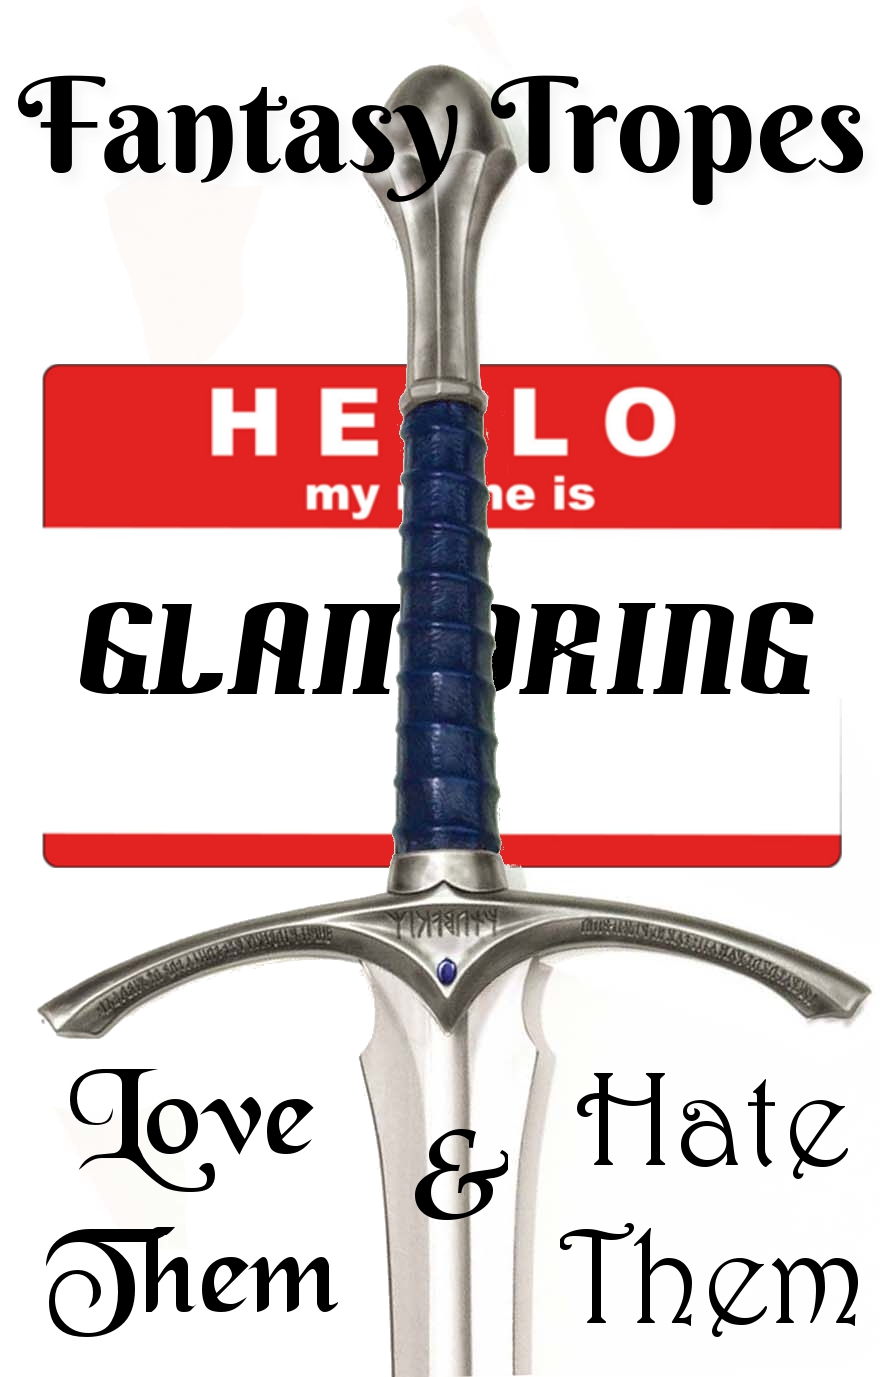 Fantasy Tropes Hello My Name is Glamdring